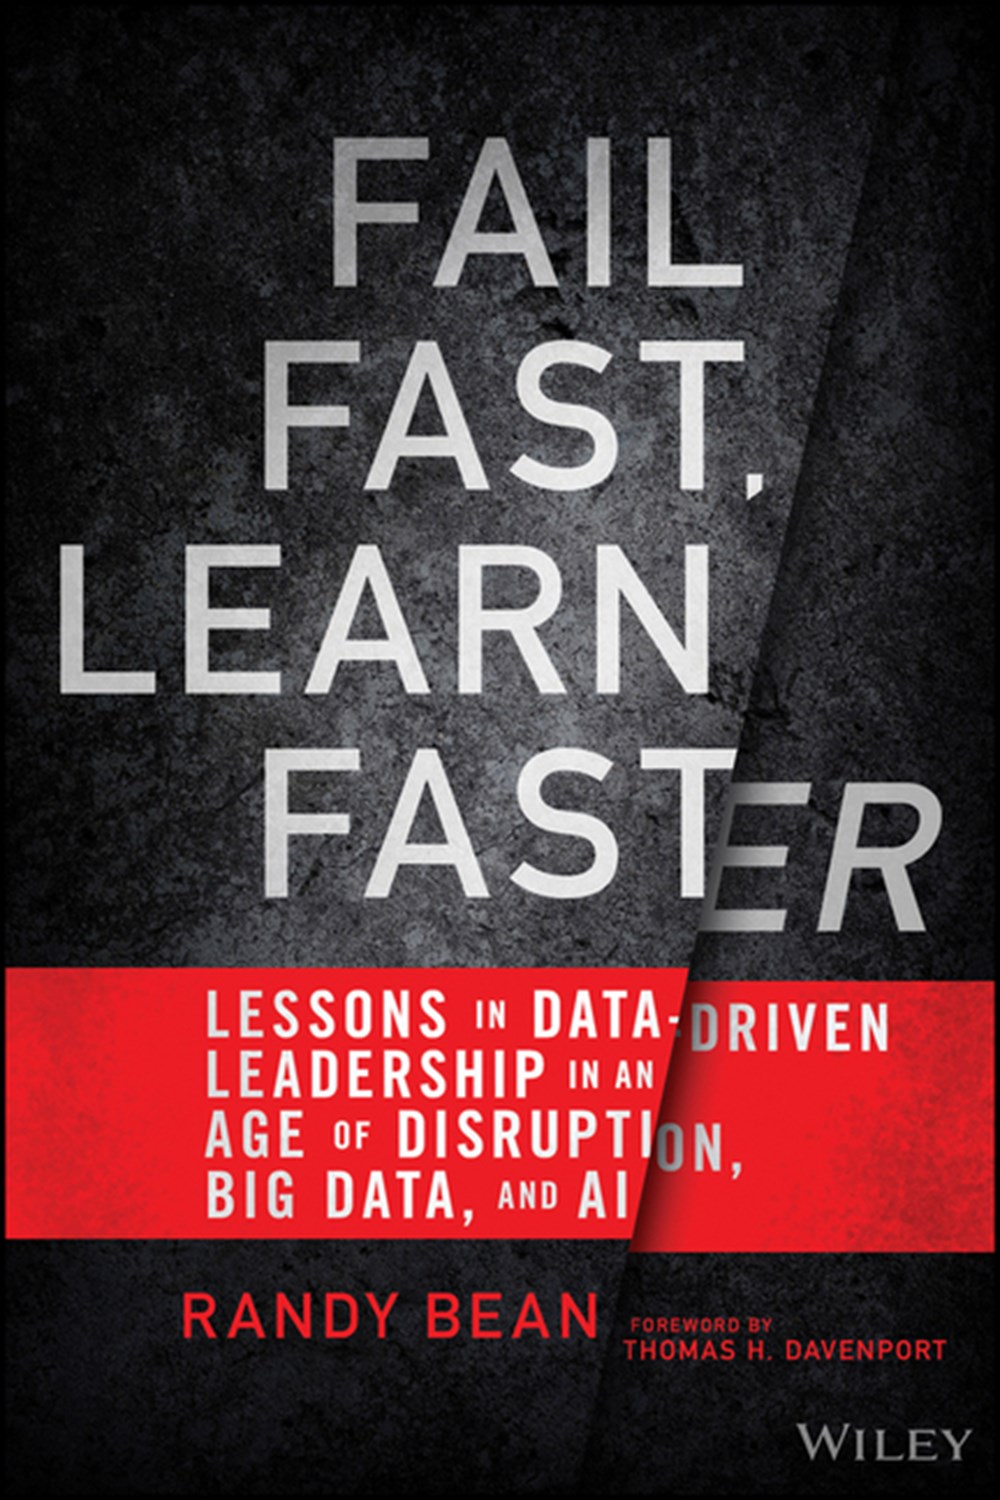 Fail Fast, Learn Faster: Lessons in Data-Driven Leadership in an Age of Disruption, Big Data, and AI